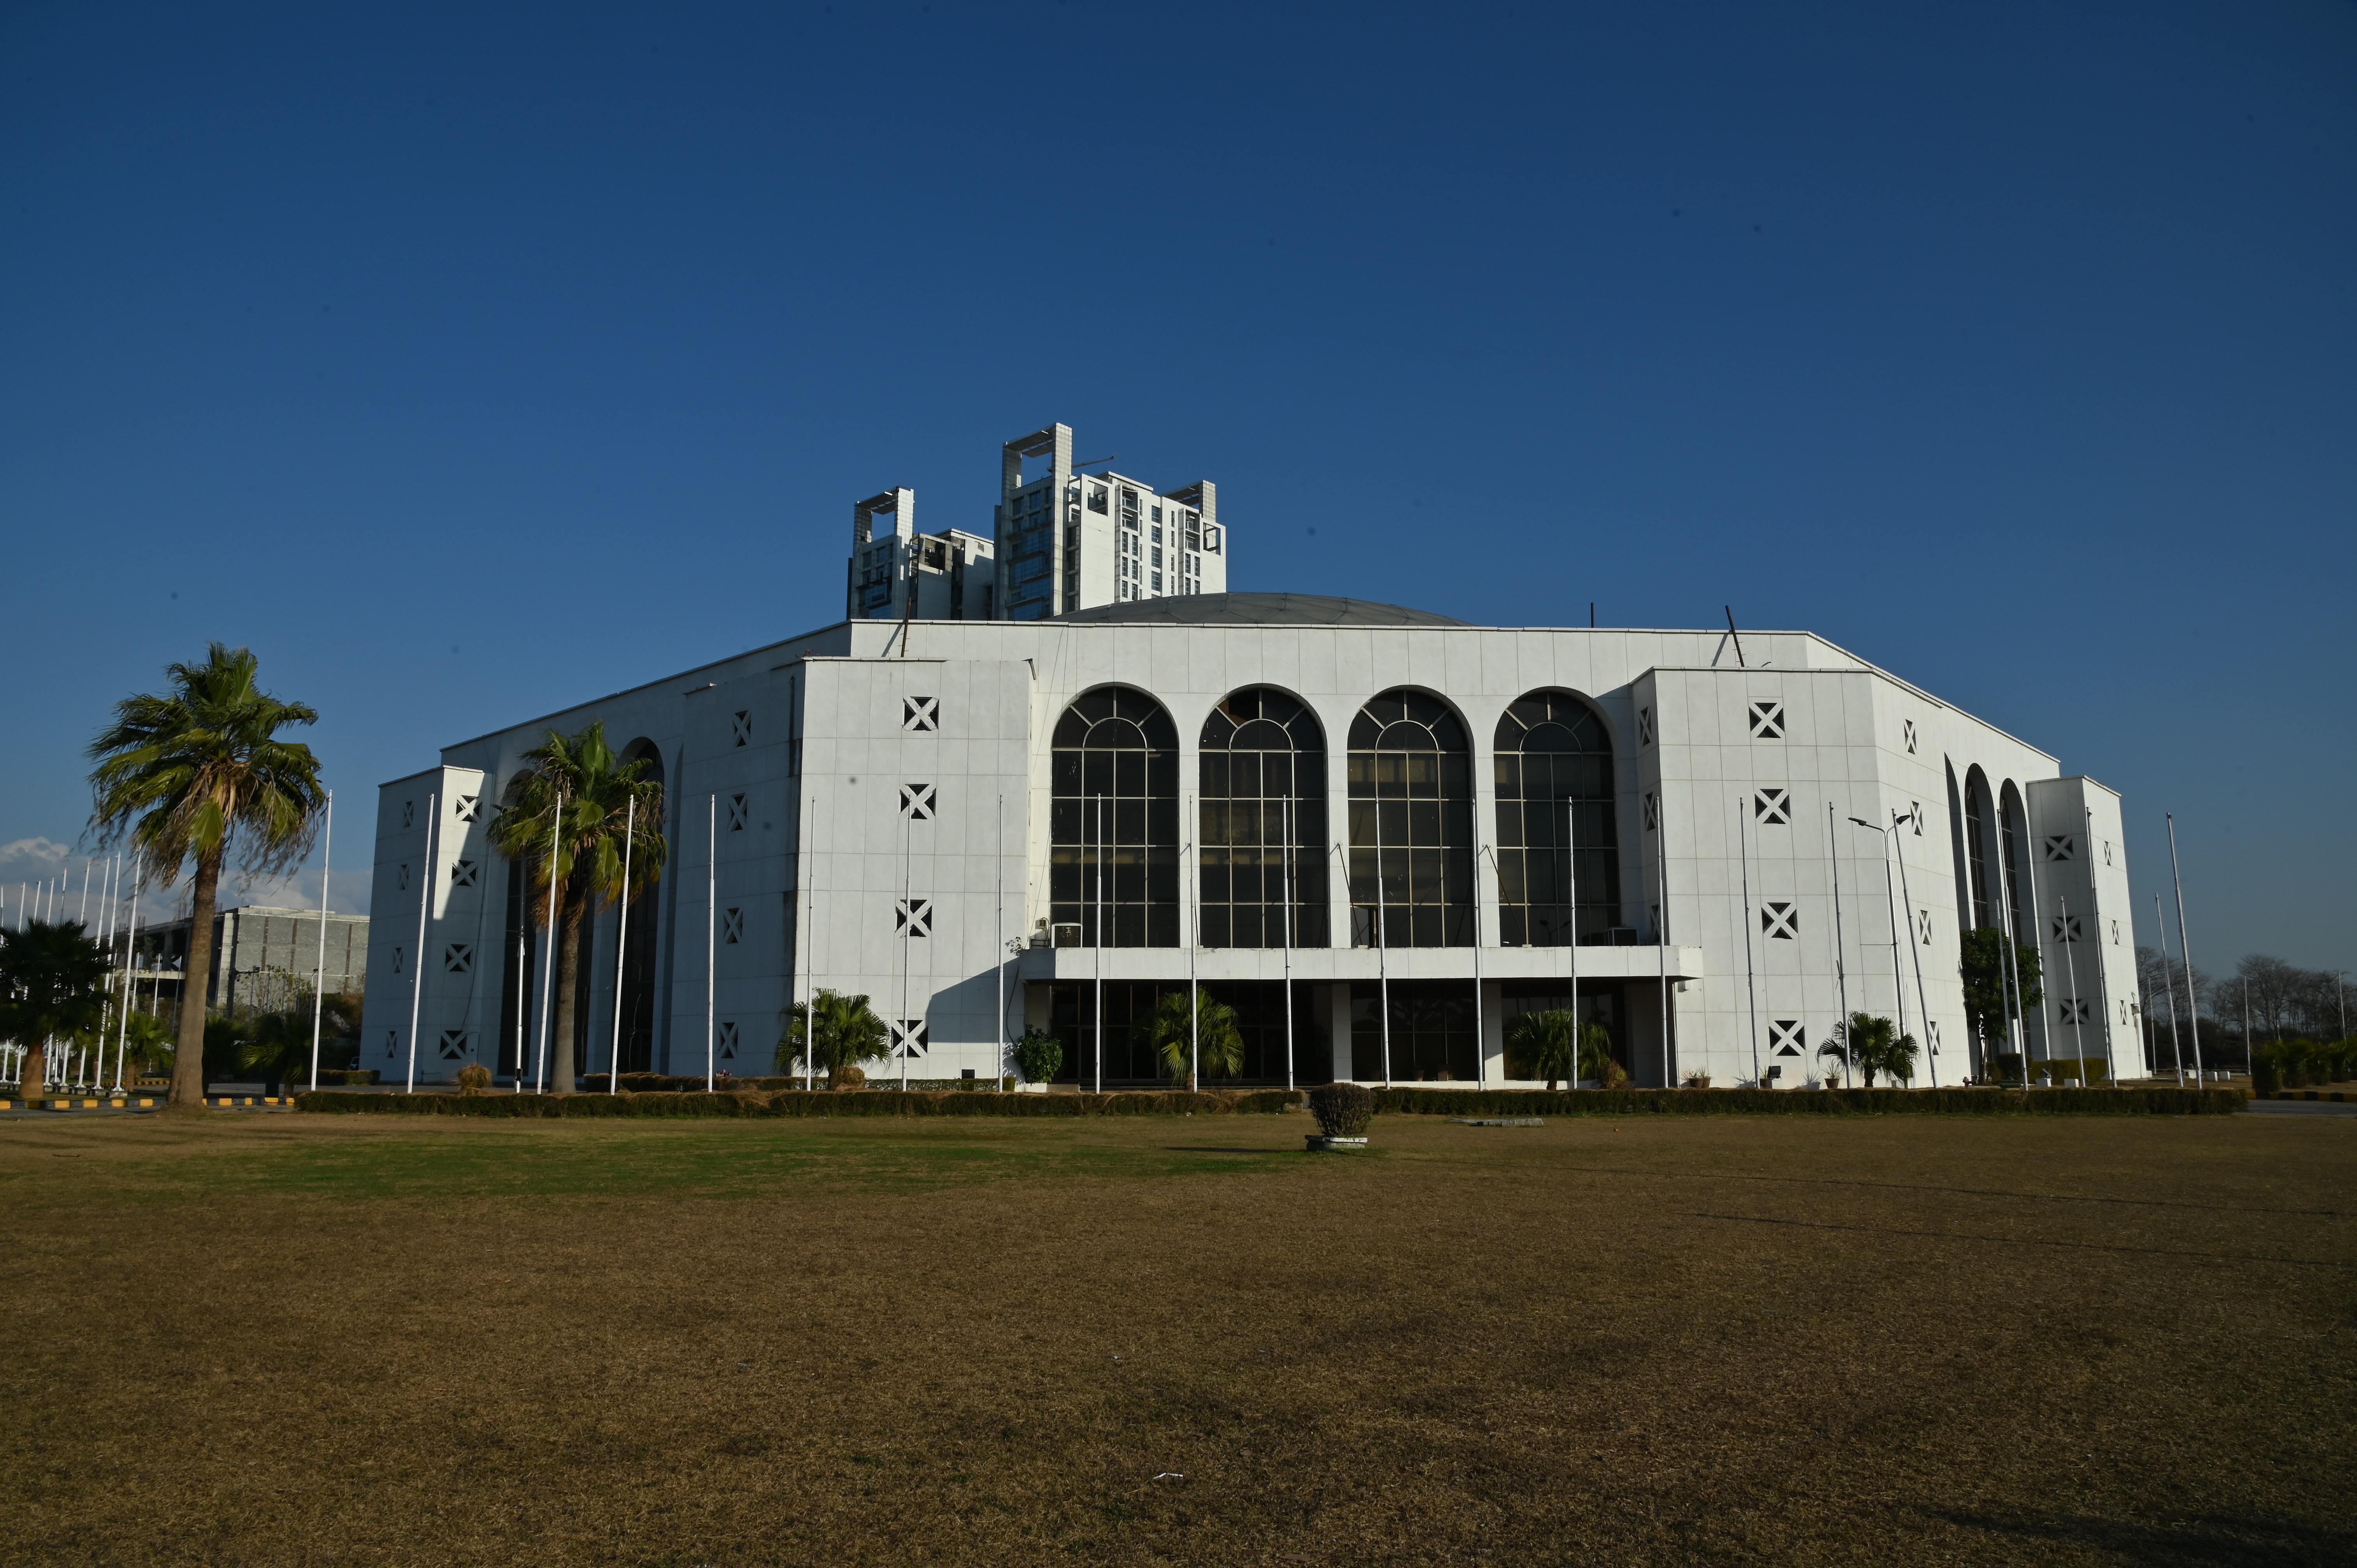 Jinnah Convention Centre, named after Muhammad Ali Jinnah and currently managed by the Capital Development Authority